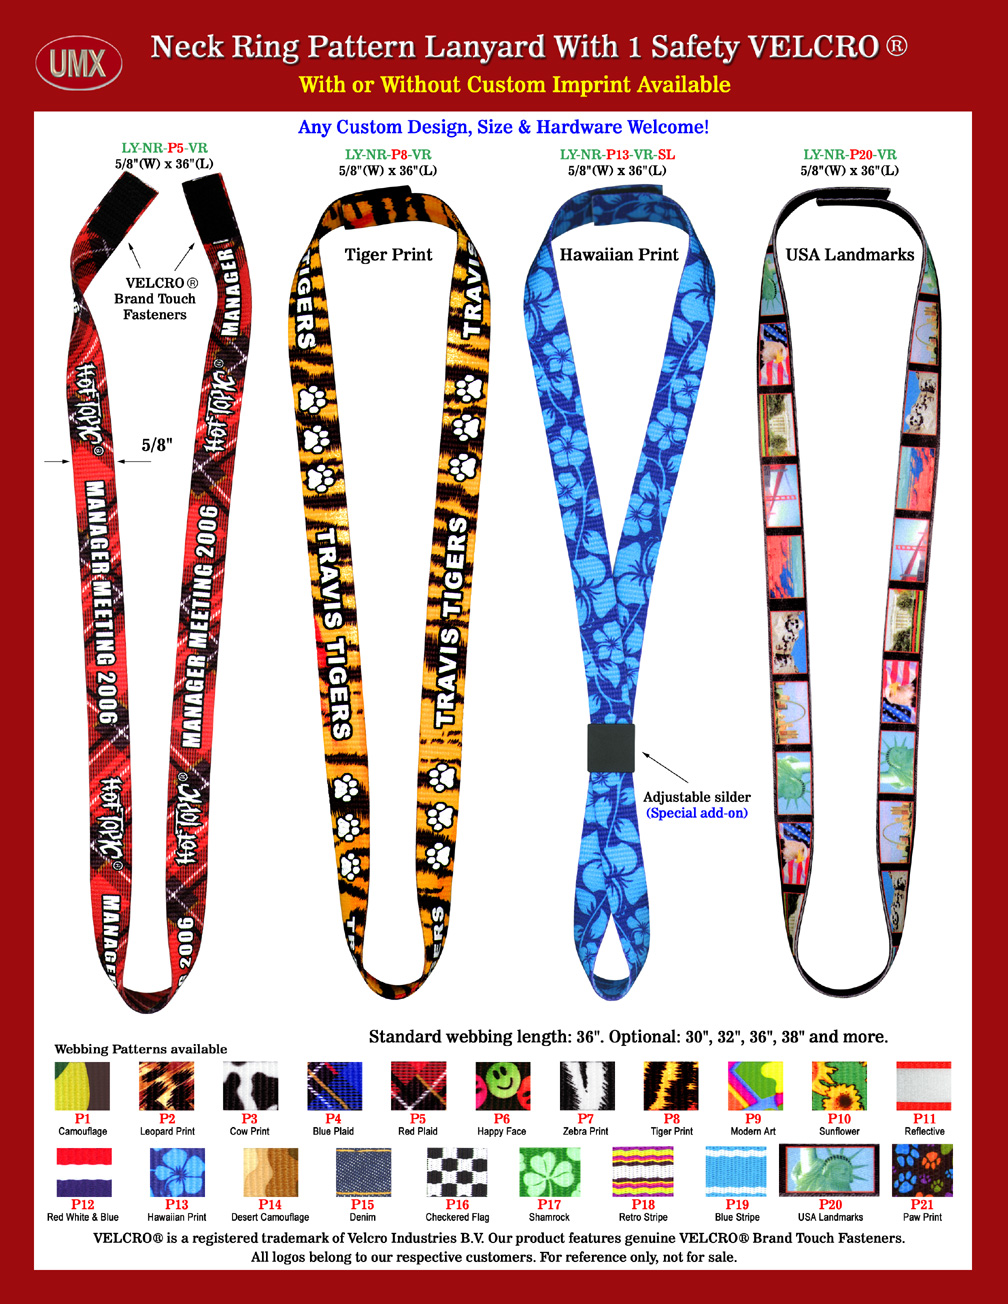 5/8" Velcro Fastener Safety Neck Lanyards, Straps, Bands And Rings With Pre-Printed Themes.